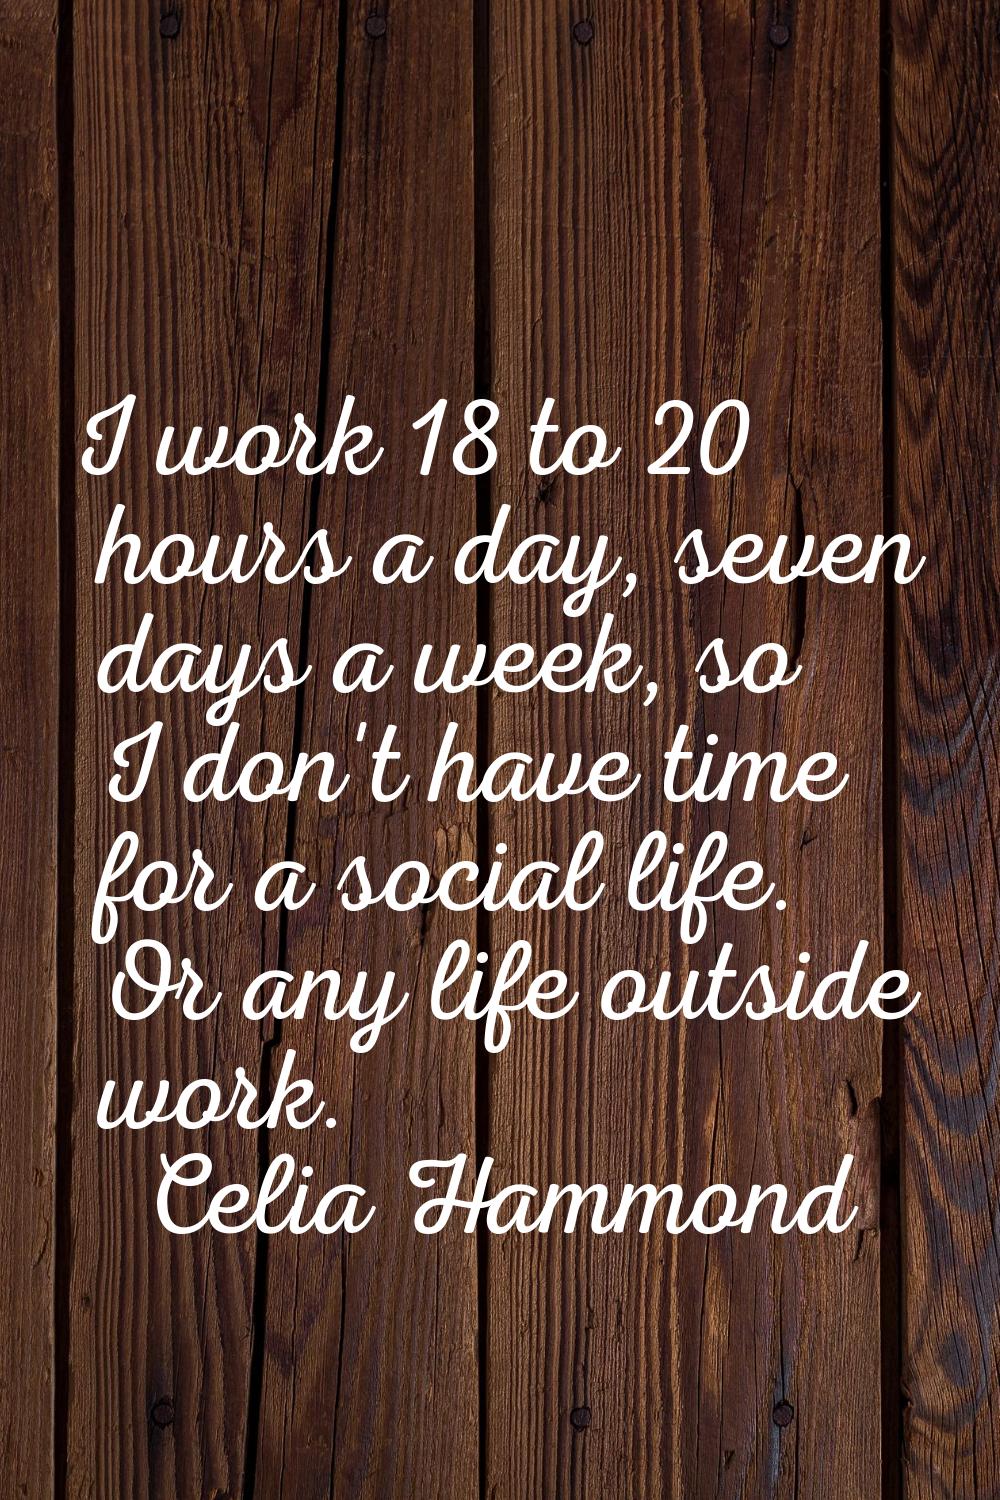 I work 18 to 20 hours a day, seven days a week, so I don't have time for a social life. Or any life